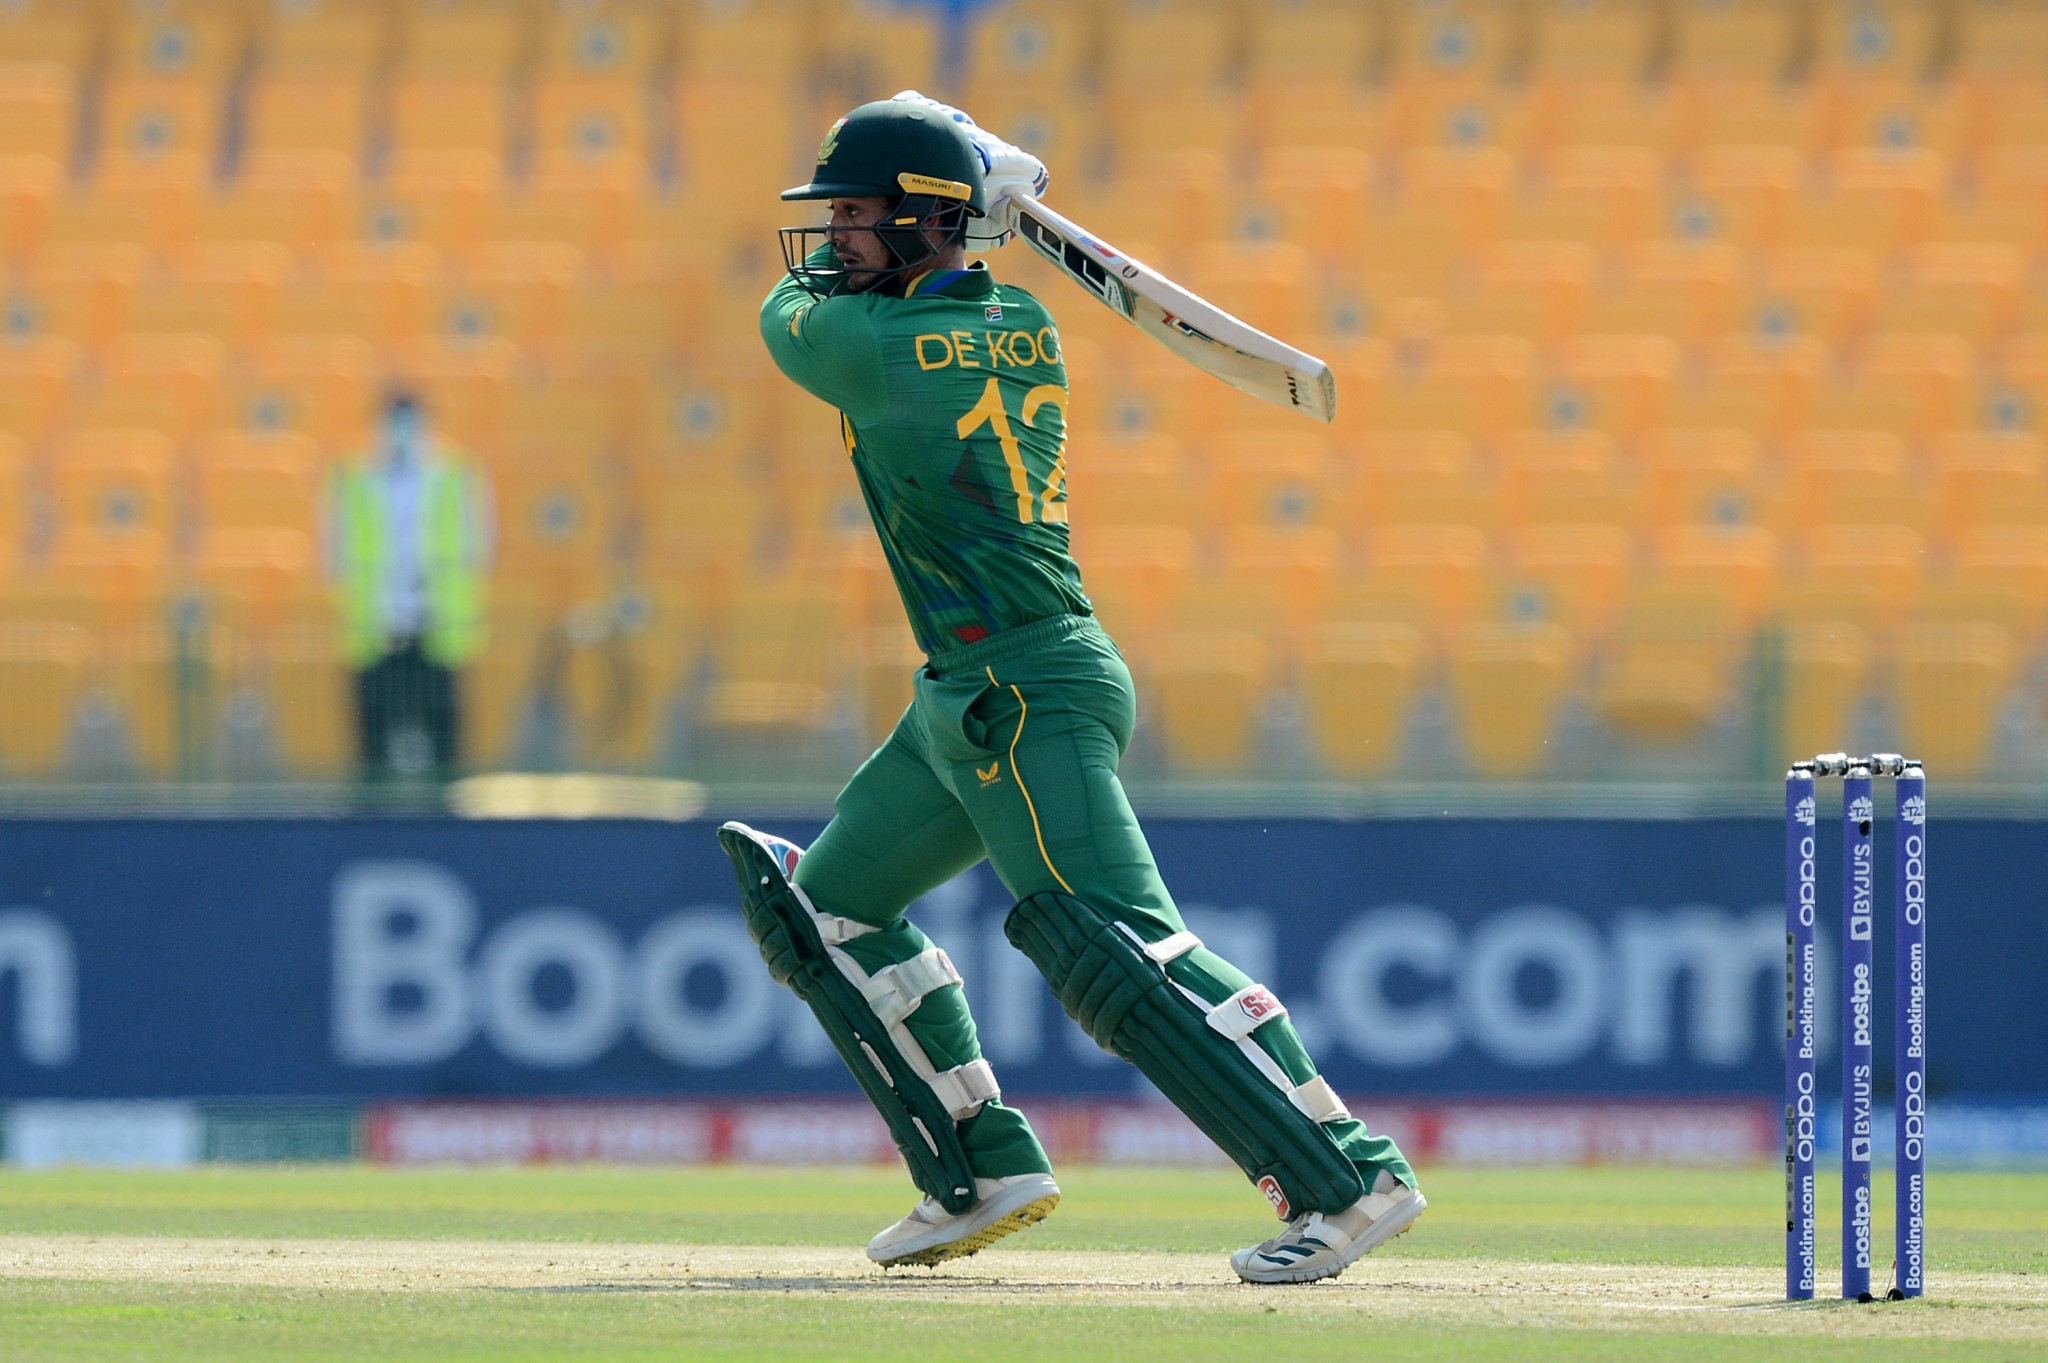 Quinton de Kock says he is deeply hurt by accusations that he is racist after he refused to take the knee ©Getty Images